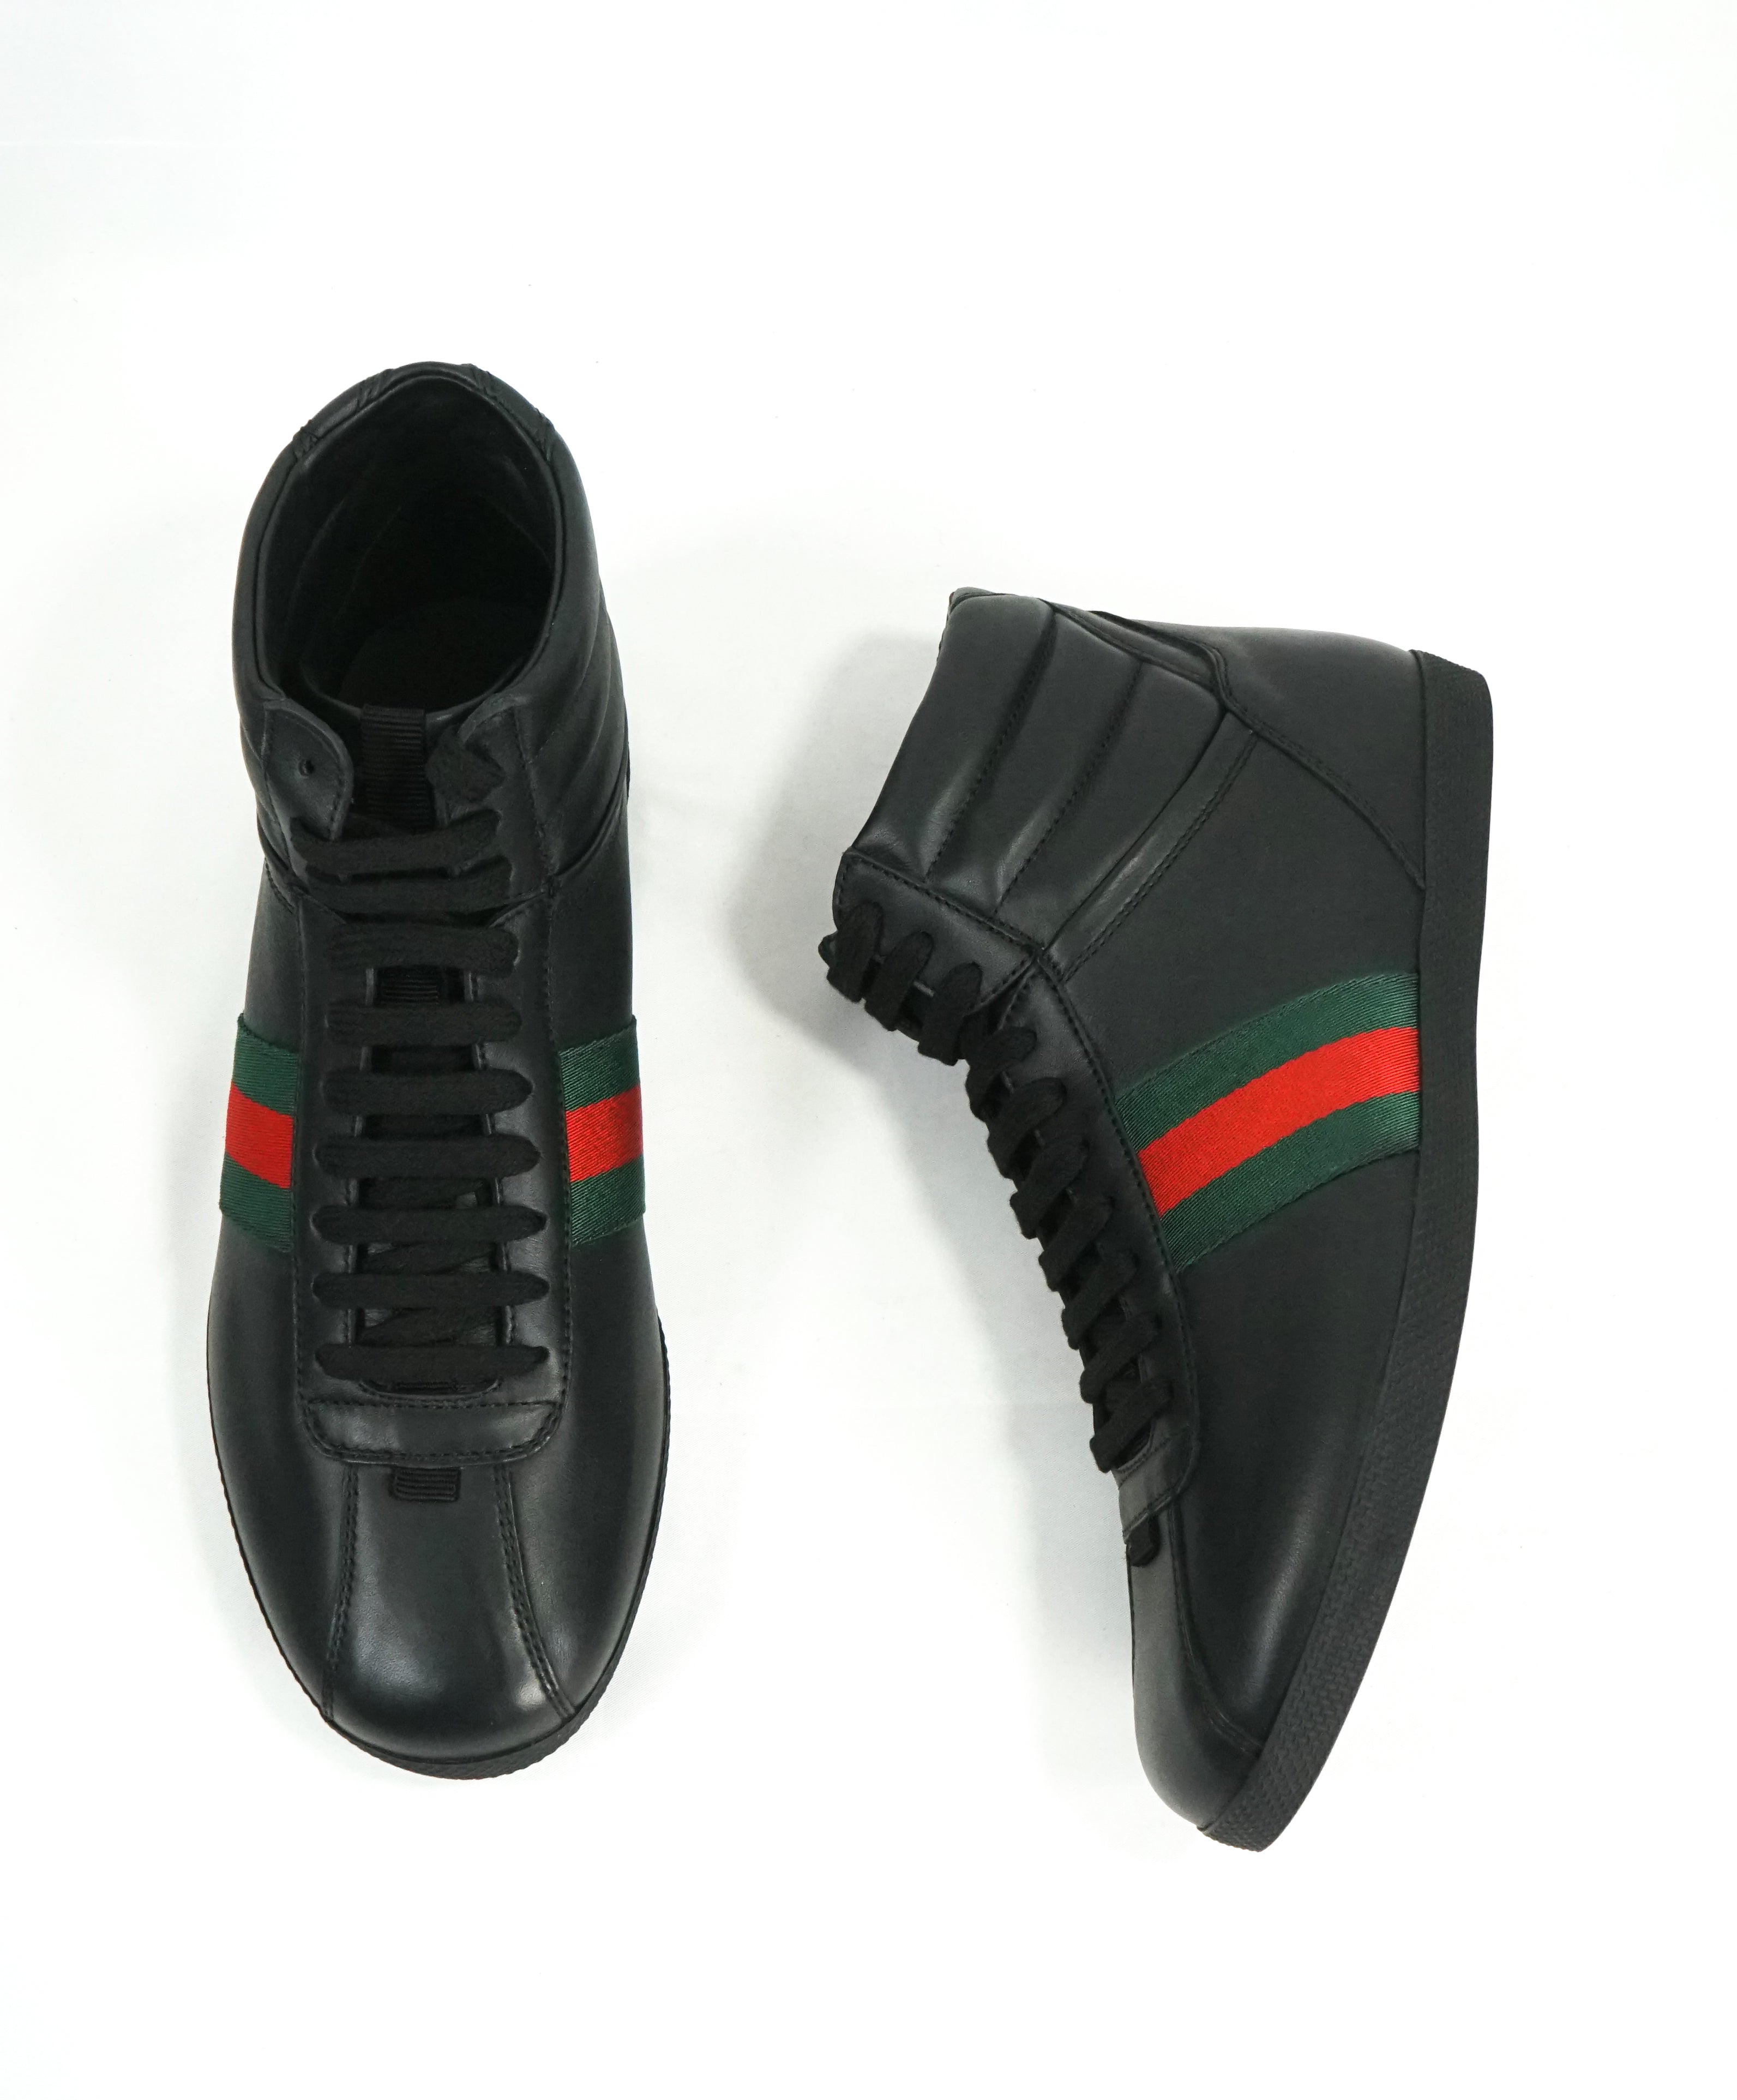 gucci shoes red and black